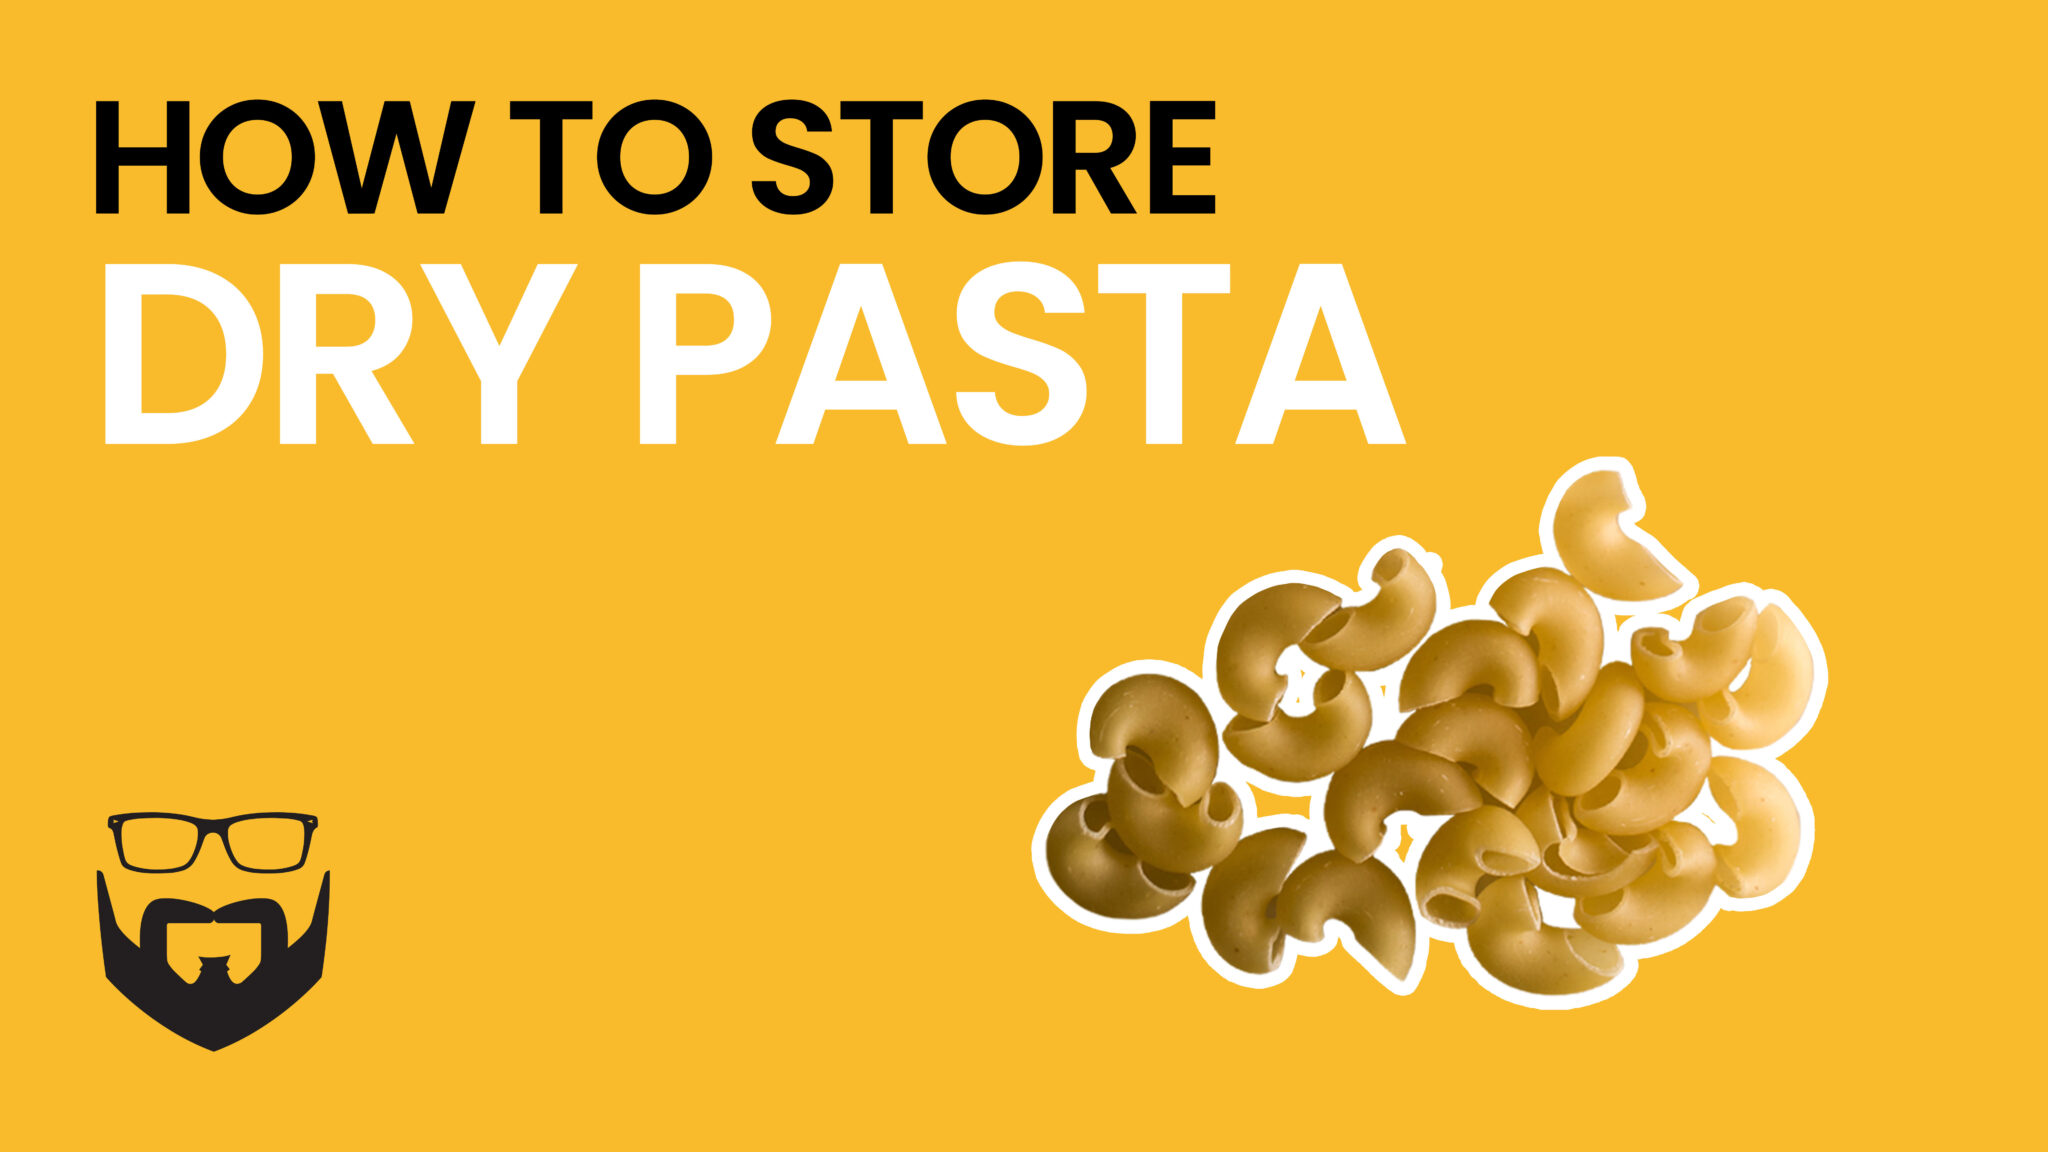 How to Store Dry Pasta Video - Yellow